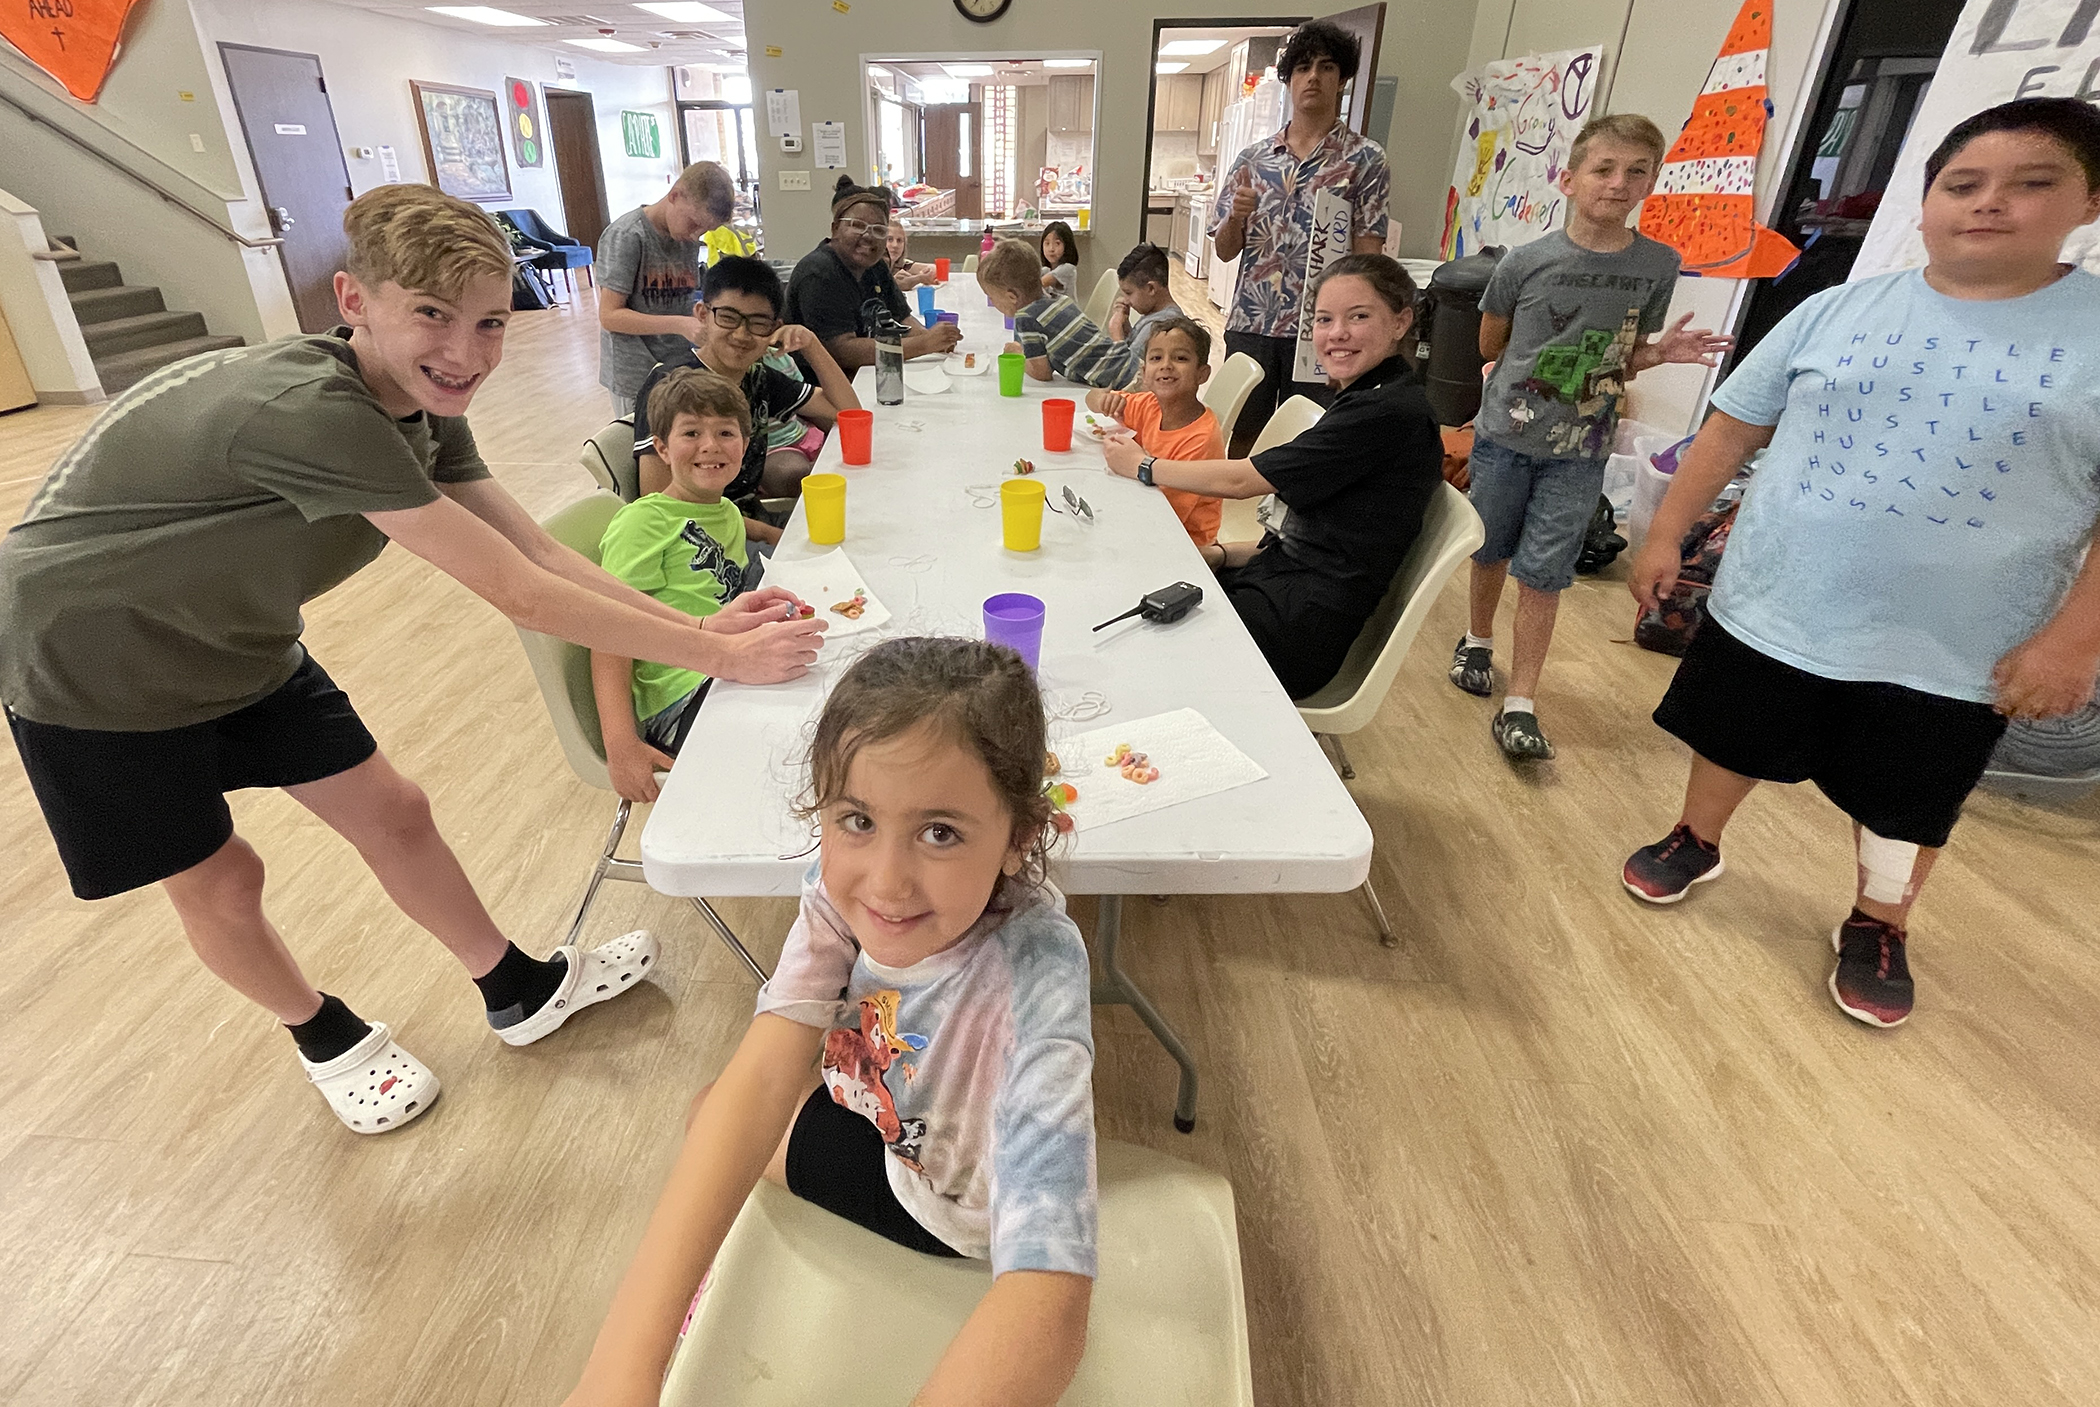 Messiah Lutheran Church to Host Three-Week Day Camp This Summer